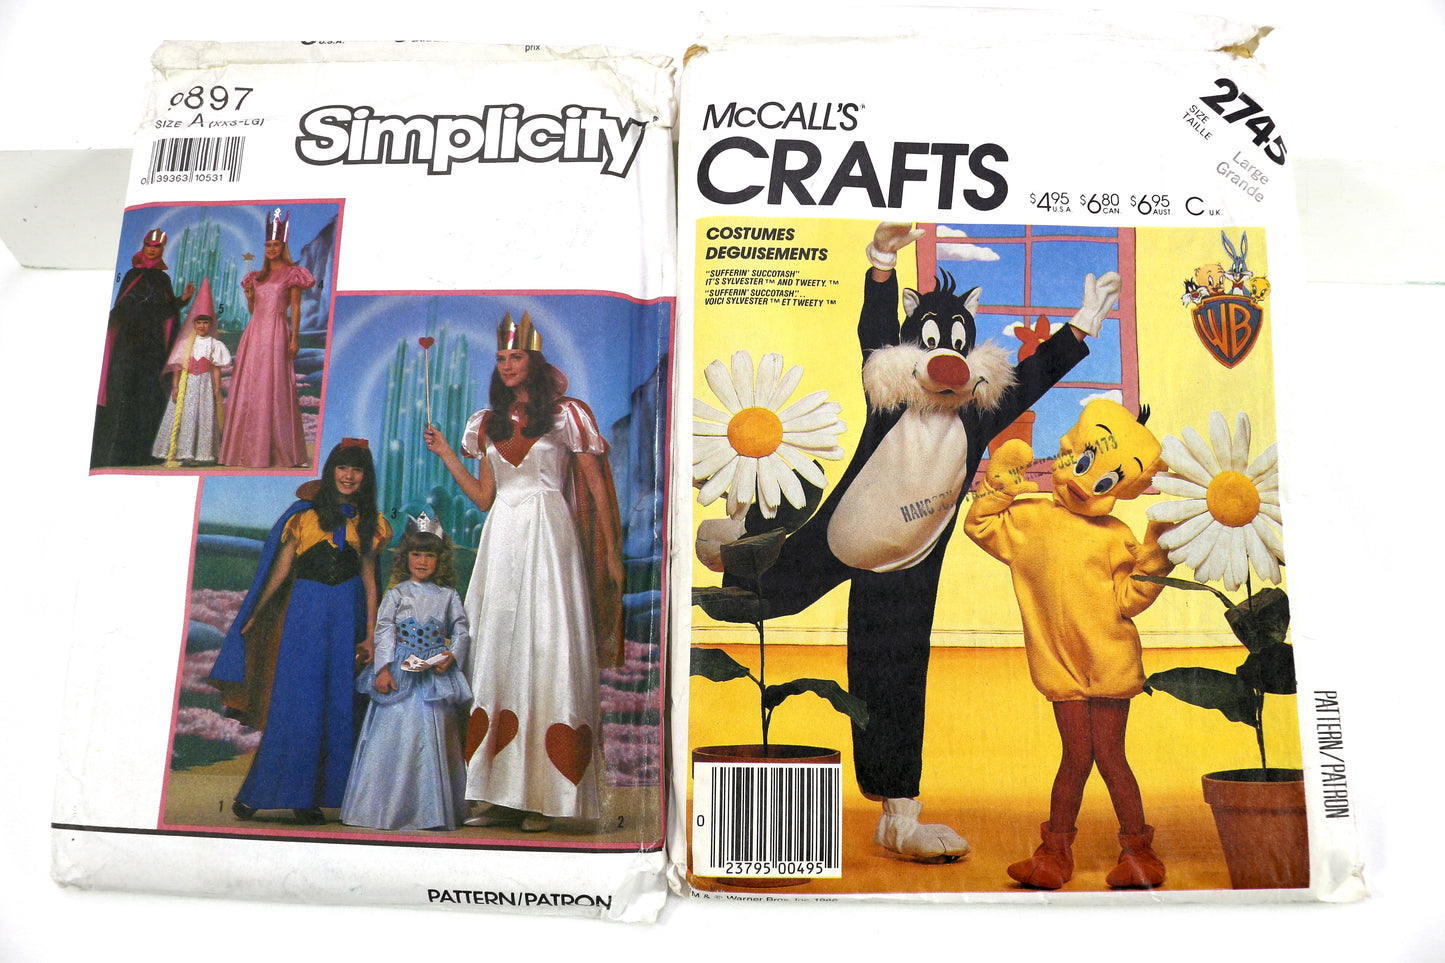 Simplicity Wizard of Oz Costume Sewing Pattern or McCalls 2745 Looney Tunes Costume Sewing Pattern